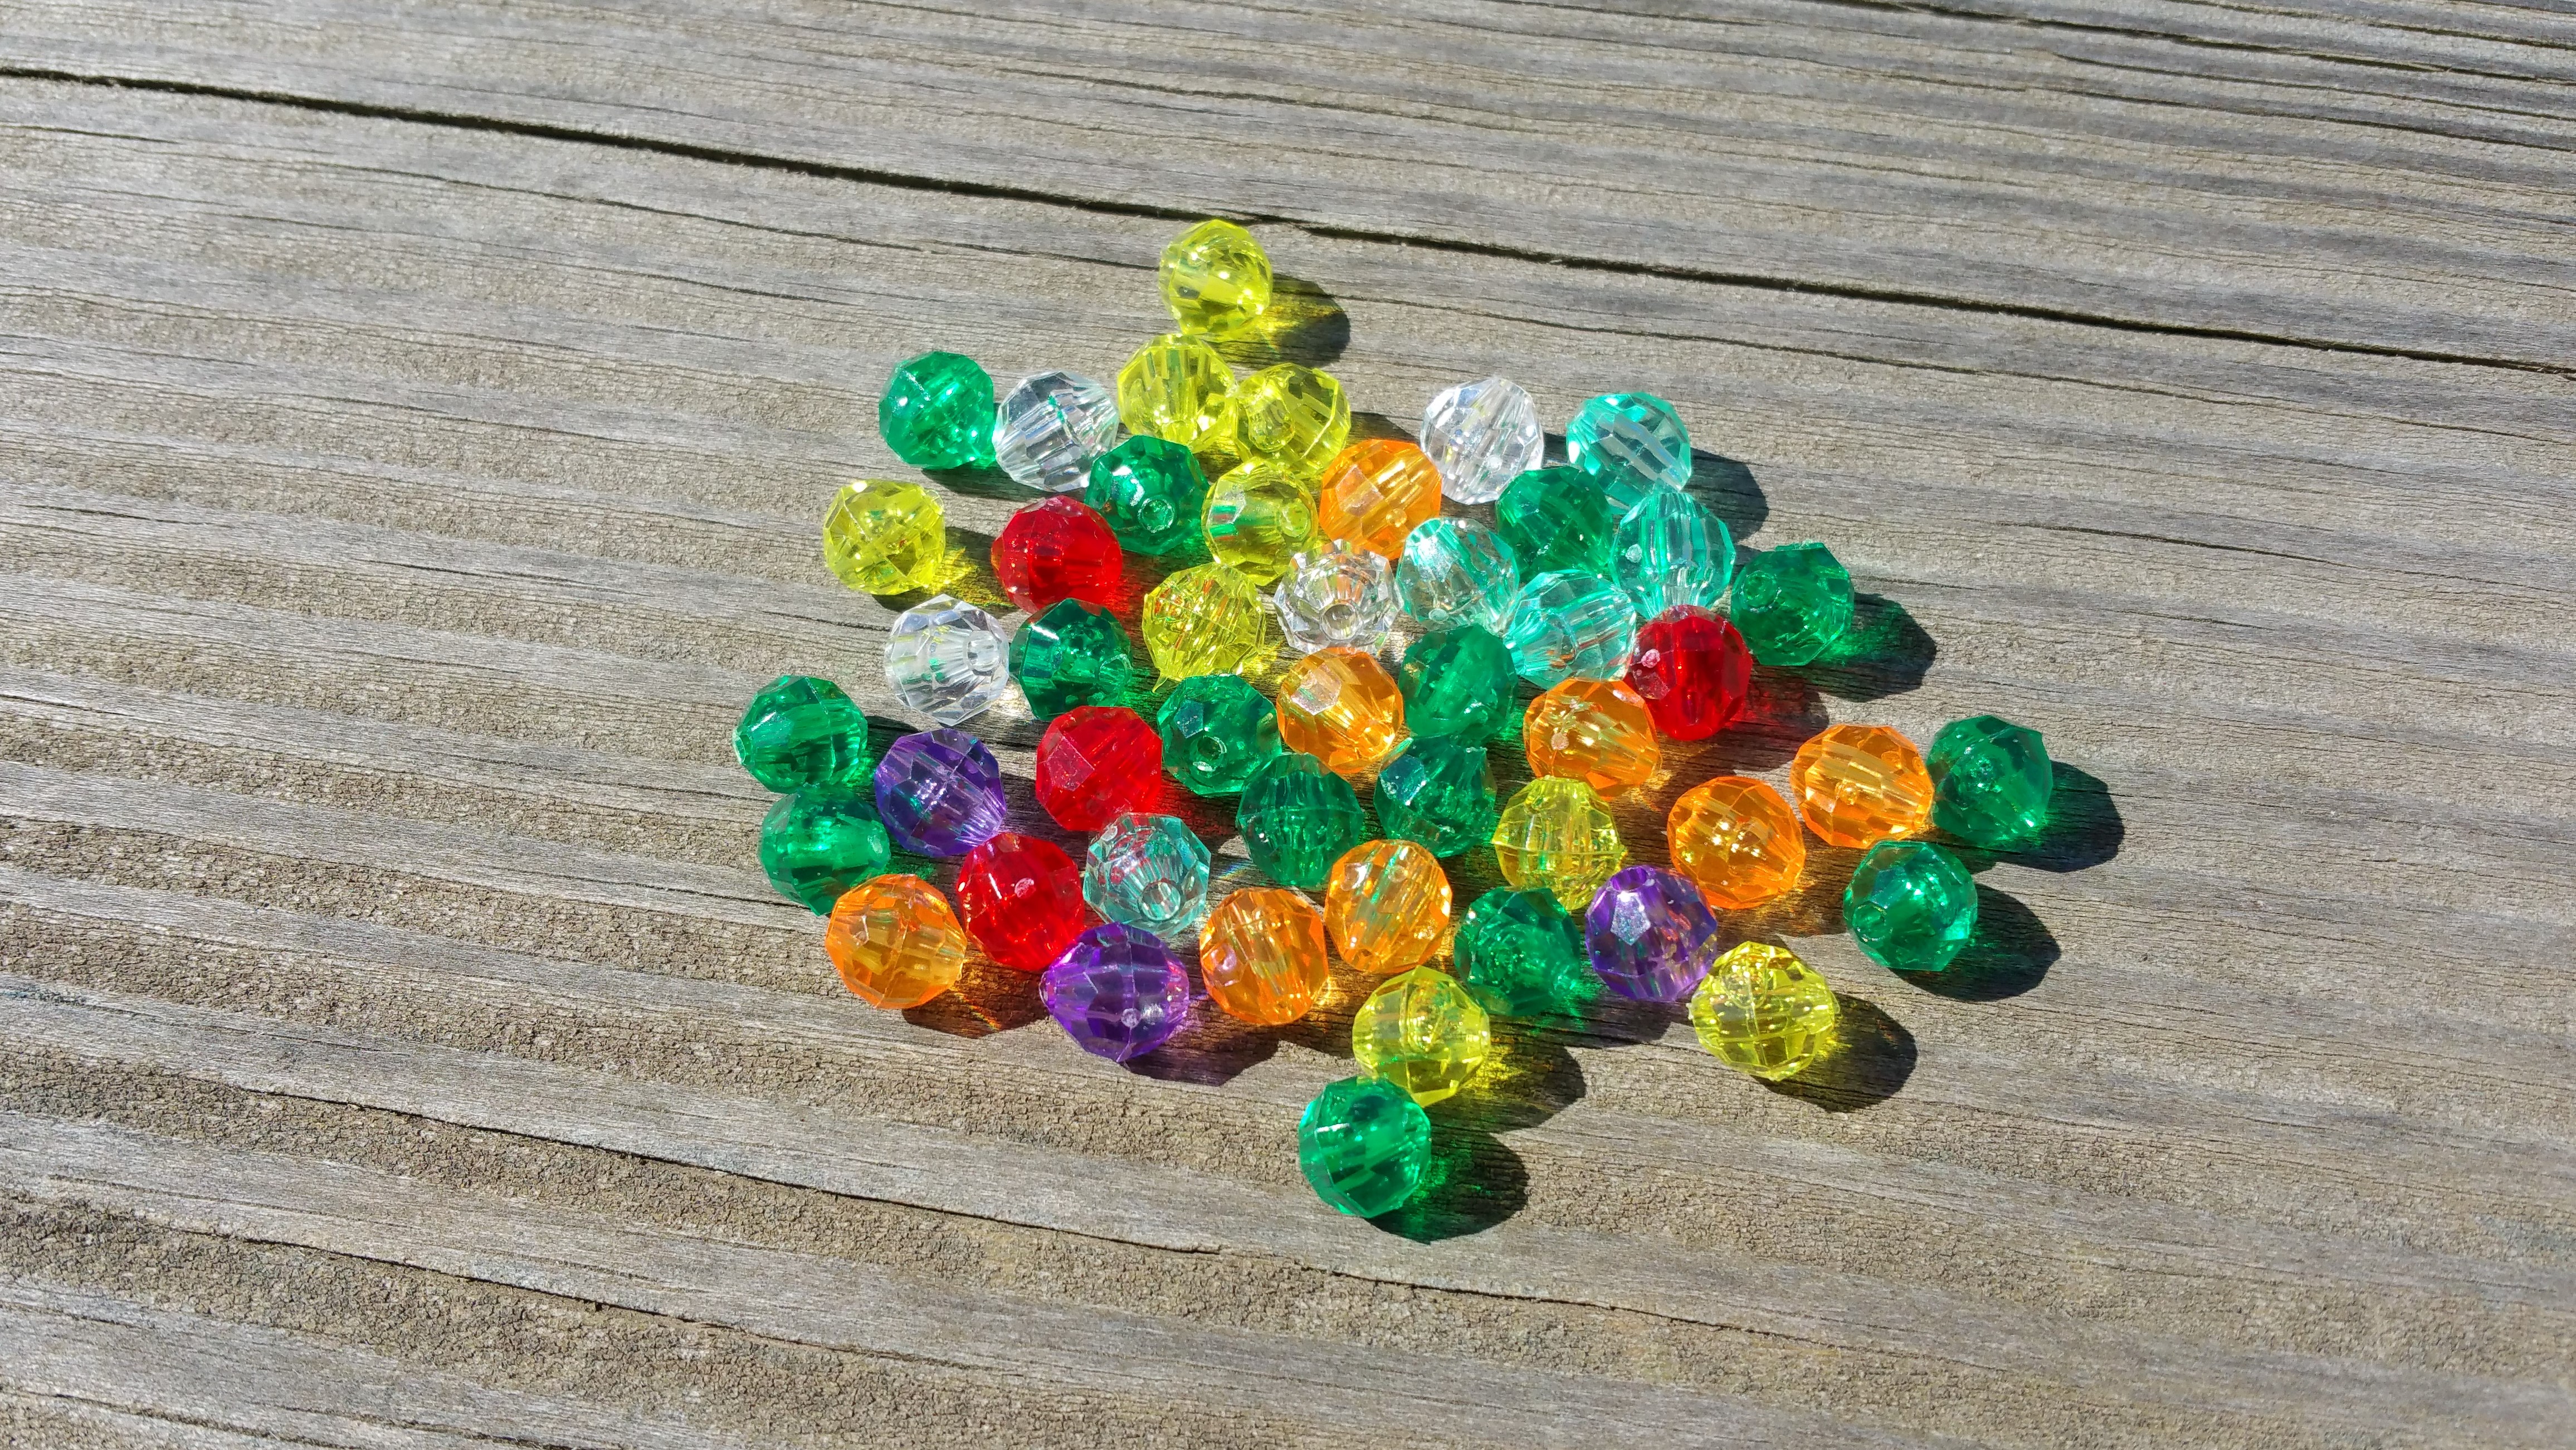 Multi-colored beads